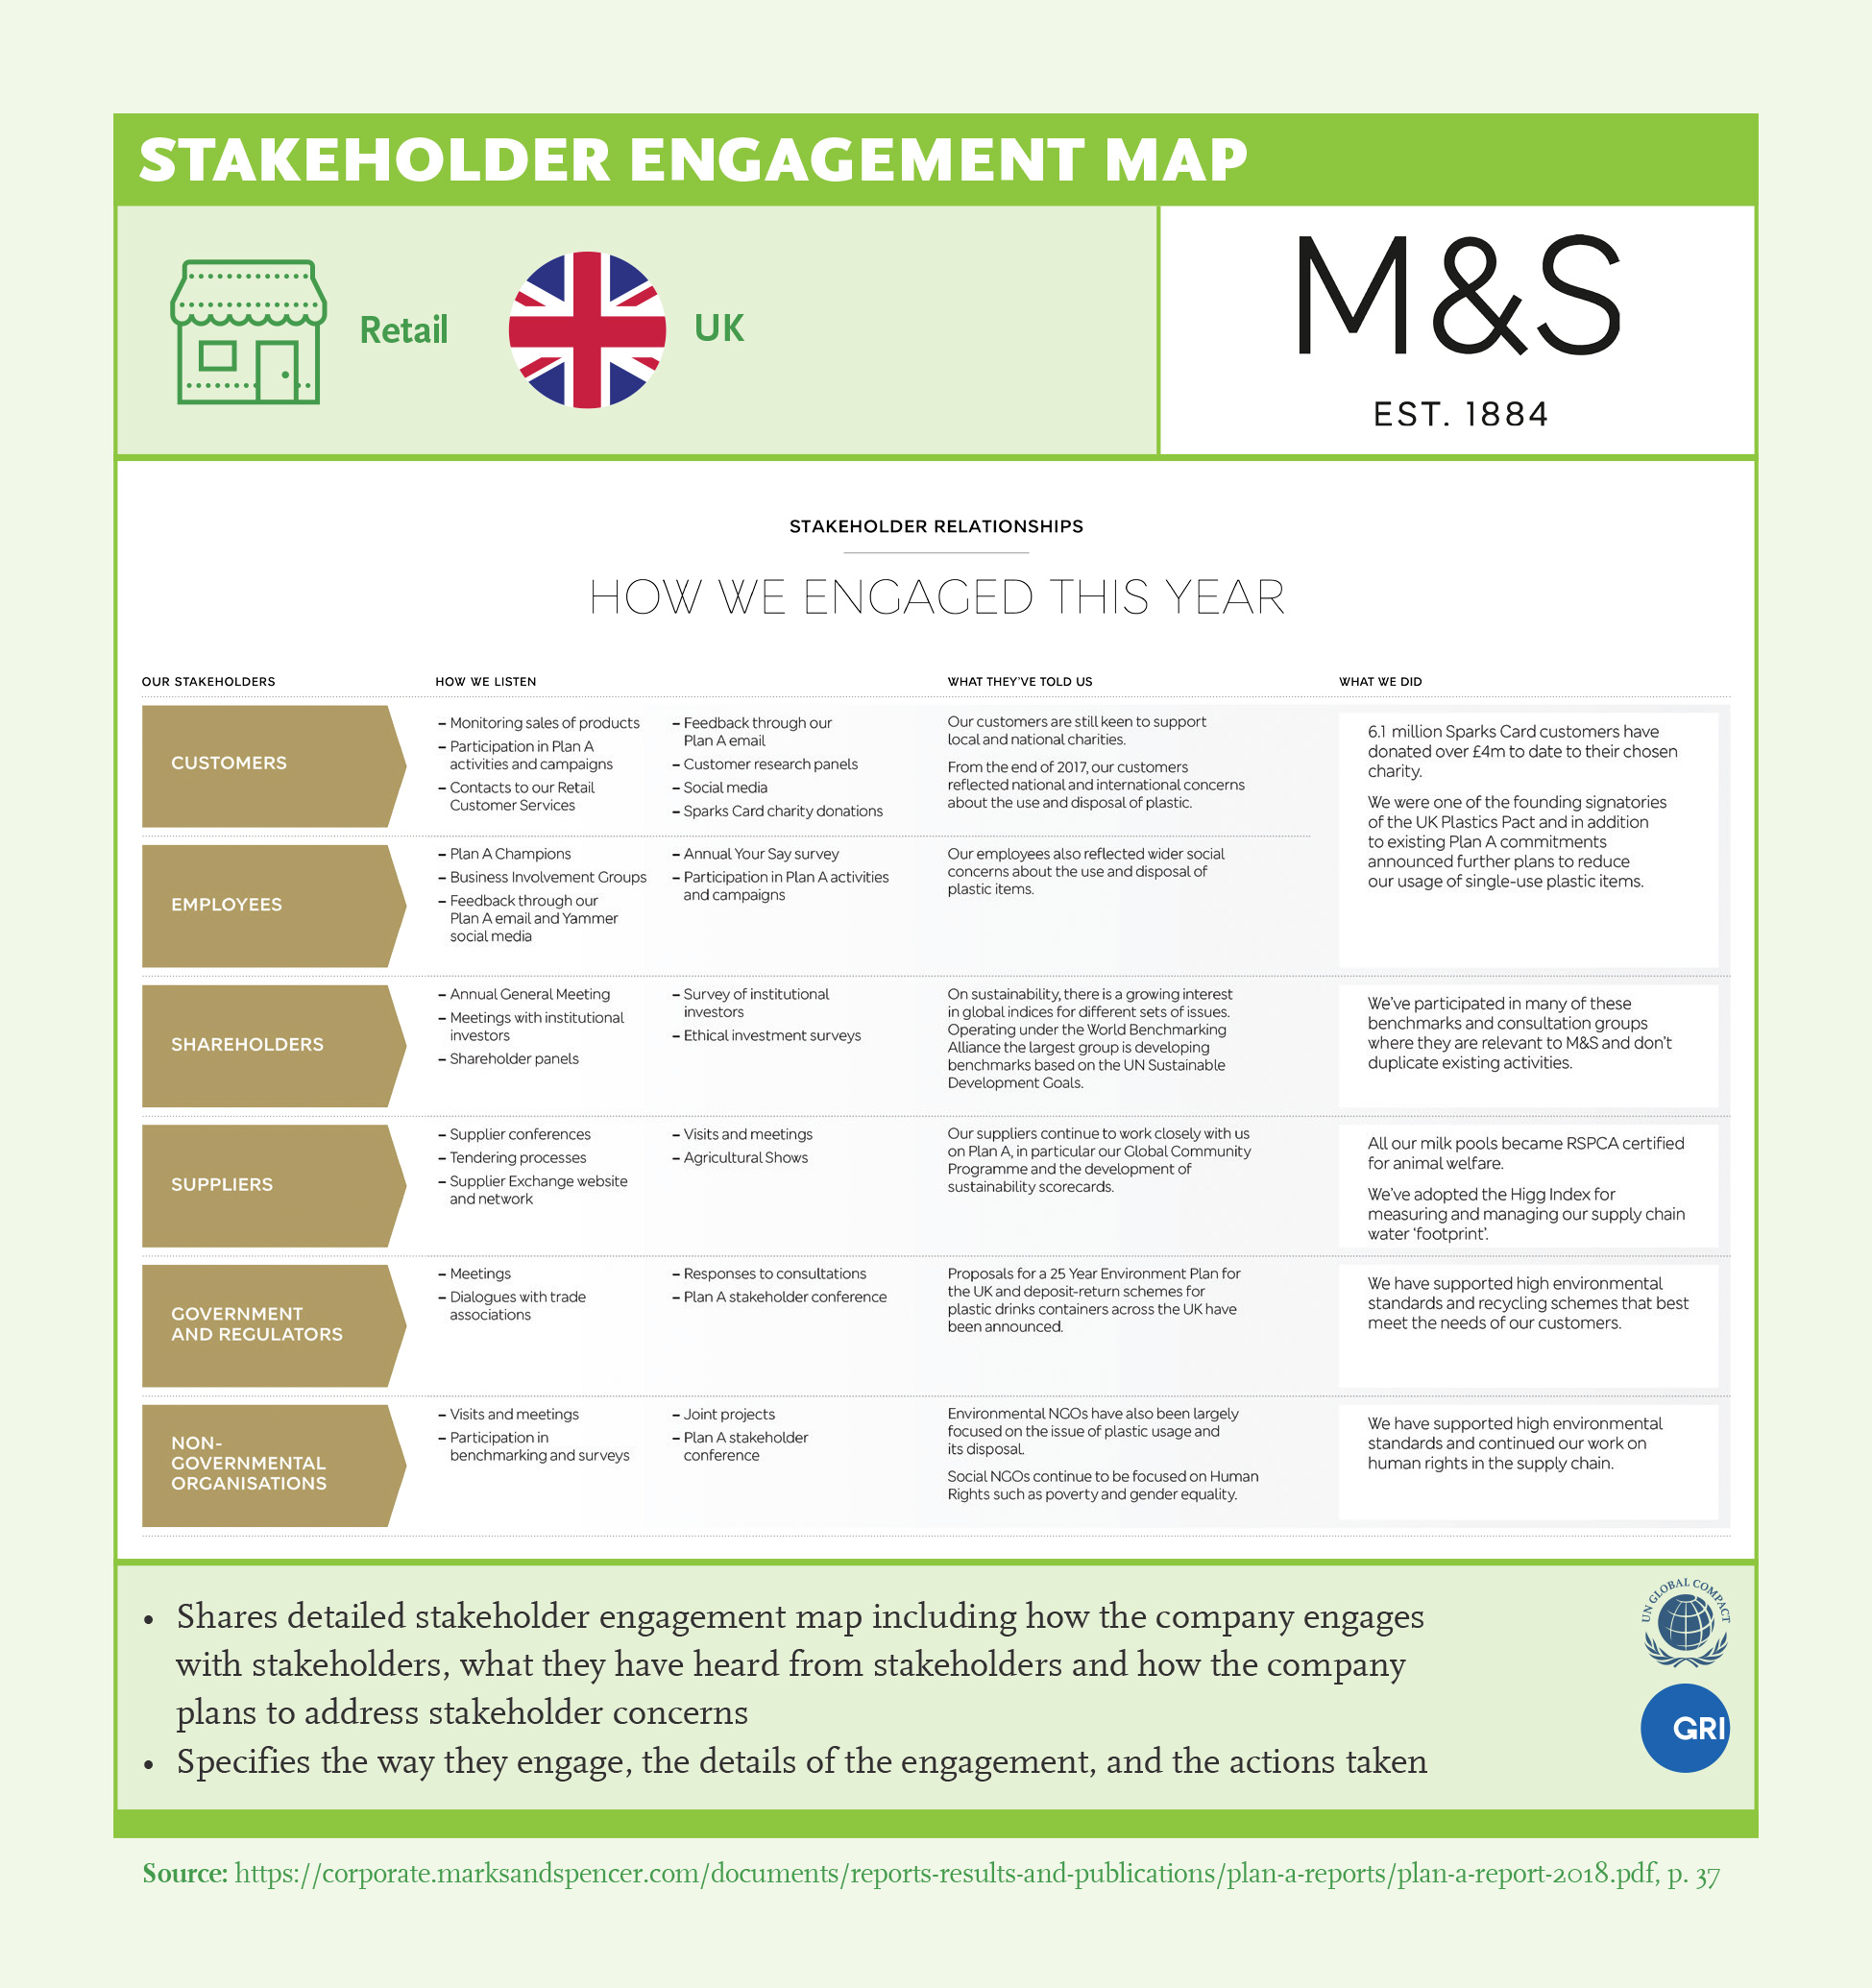 Stakeholder Engagement Map: Marks and Spencer